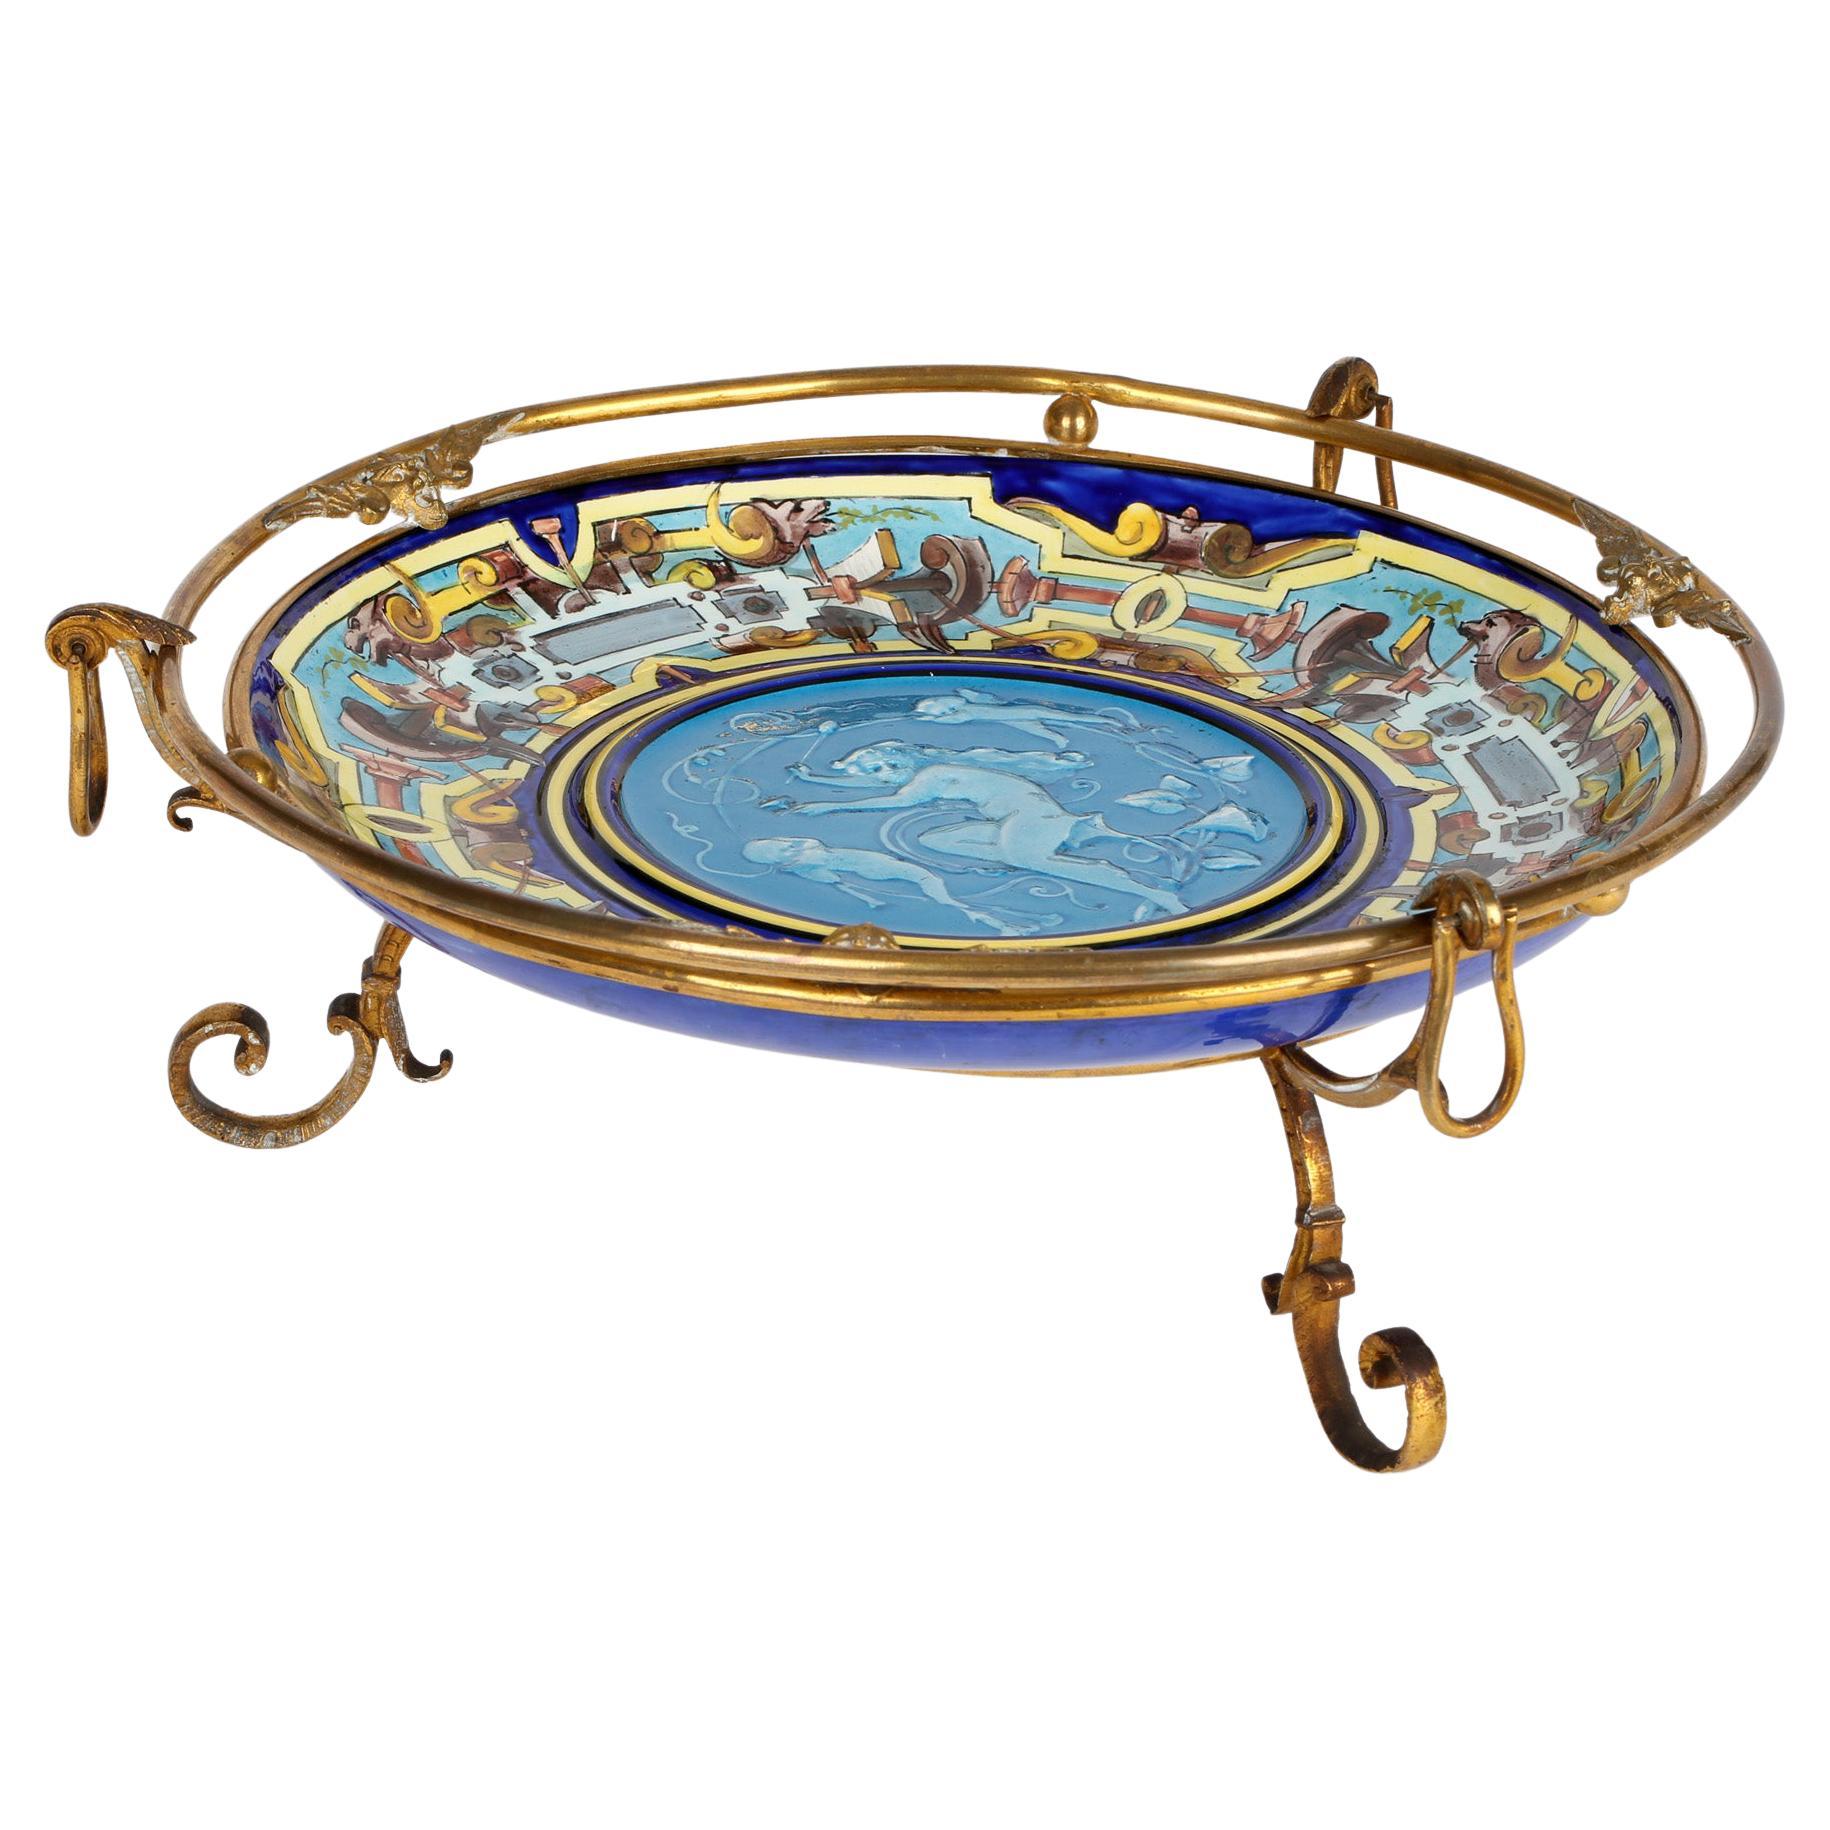 Théodore Deck Attributed French Ormolu Mounted Majolica Tazza